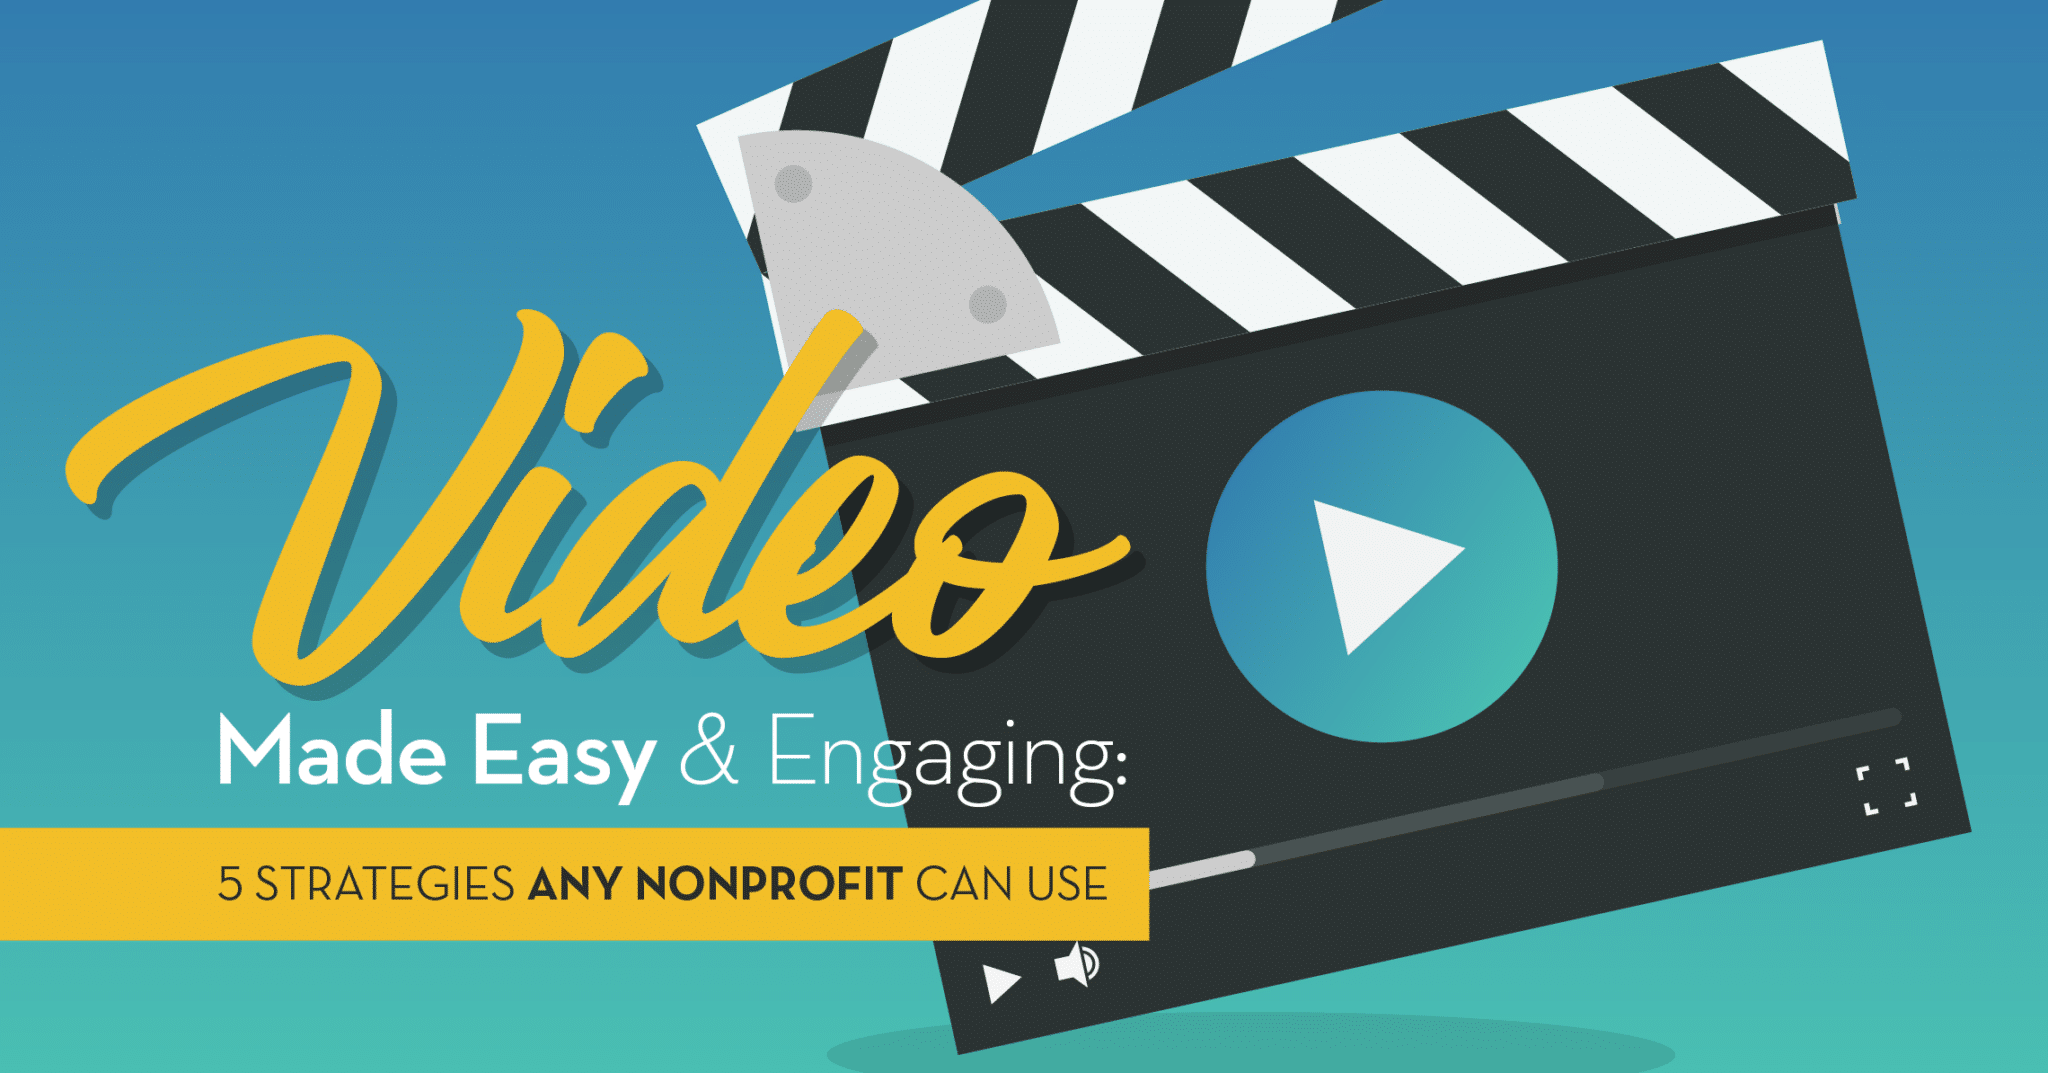 Video-Made-Easy-Web-image